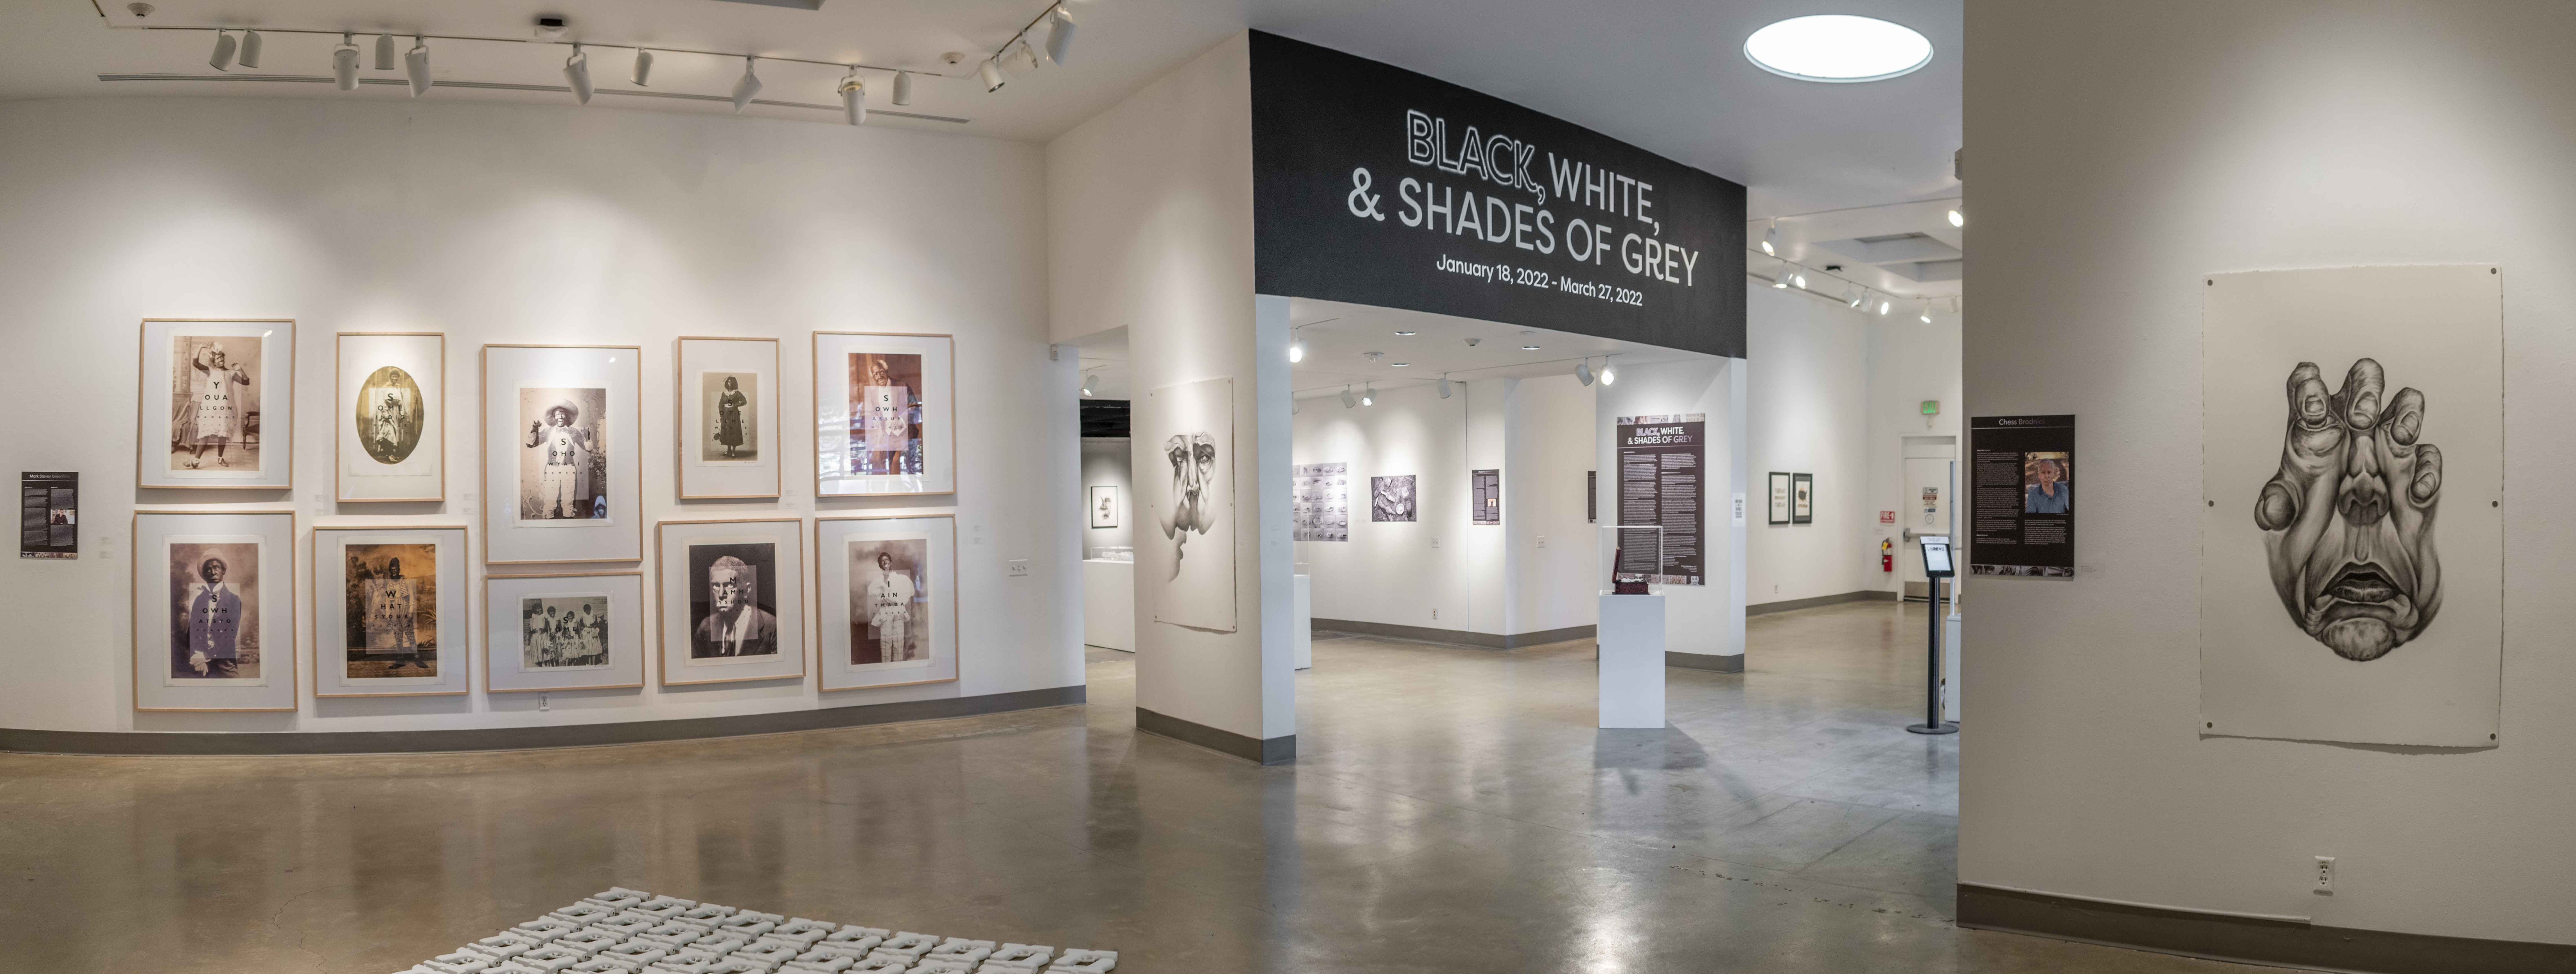 Installation View, Front East Gallery, Black, White & Shades of Grey Exhibition, Jan. 18, 2022 to Mar. 27, 2022.